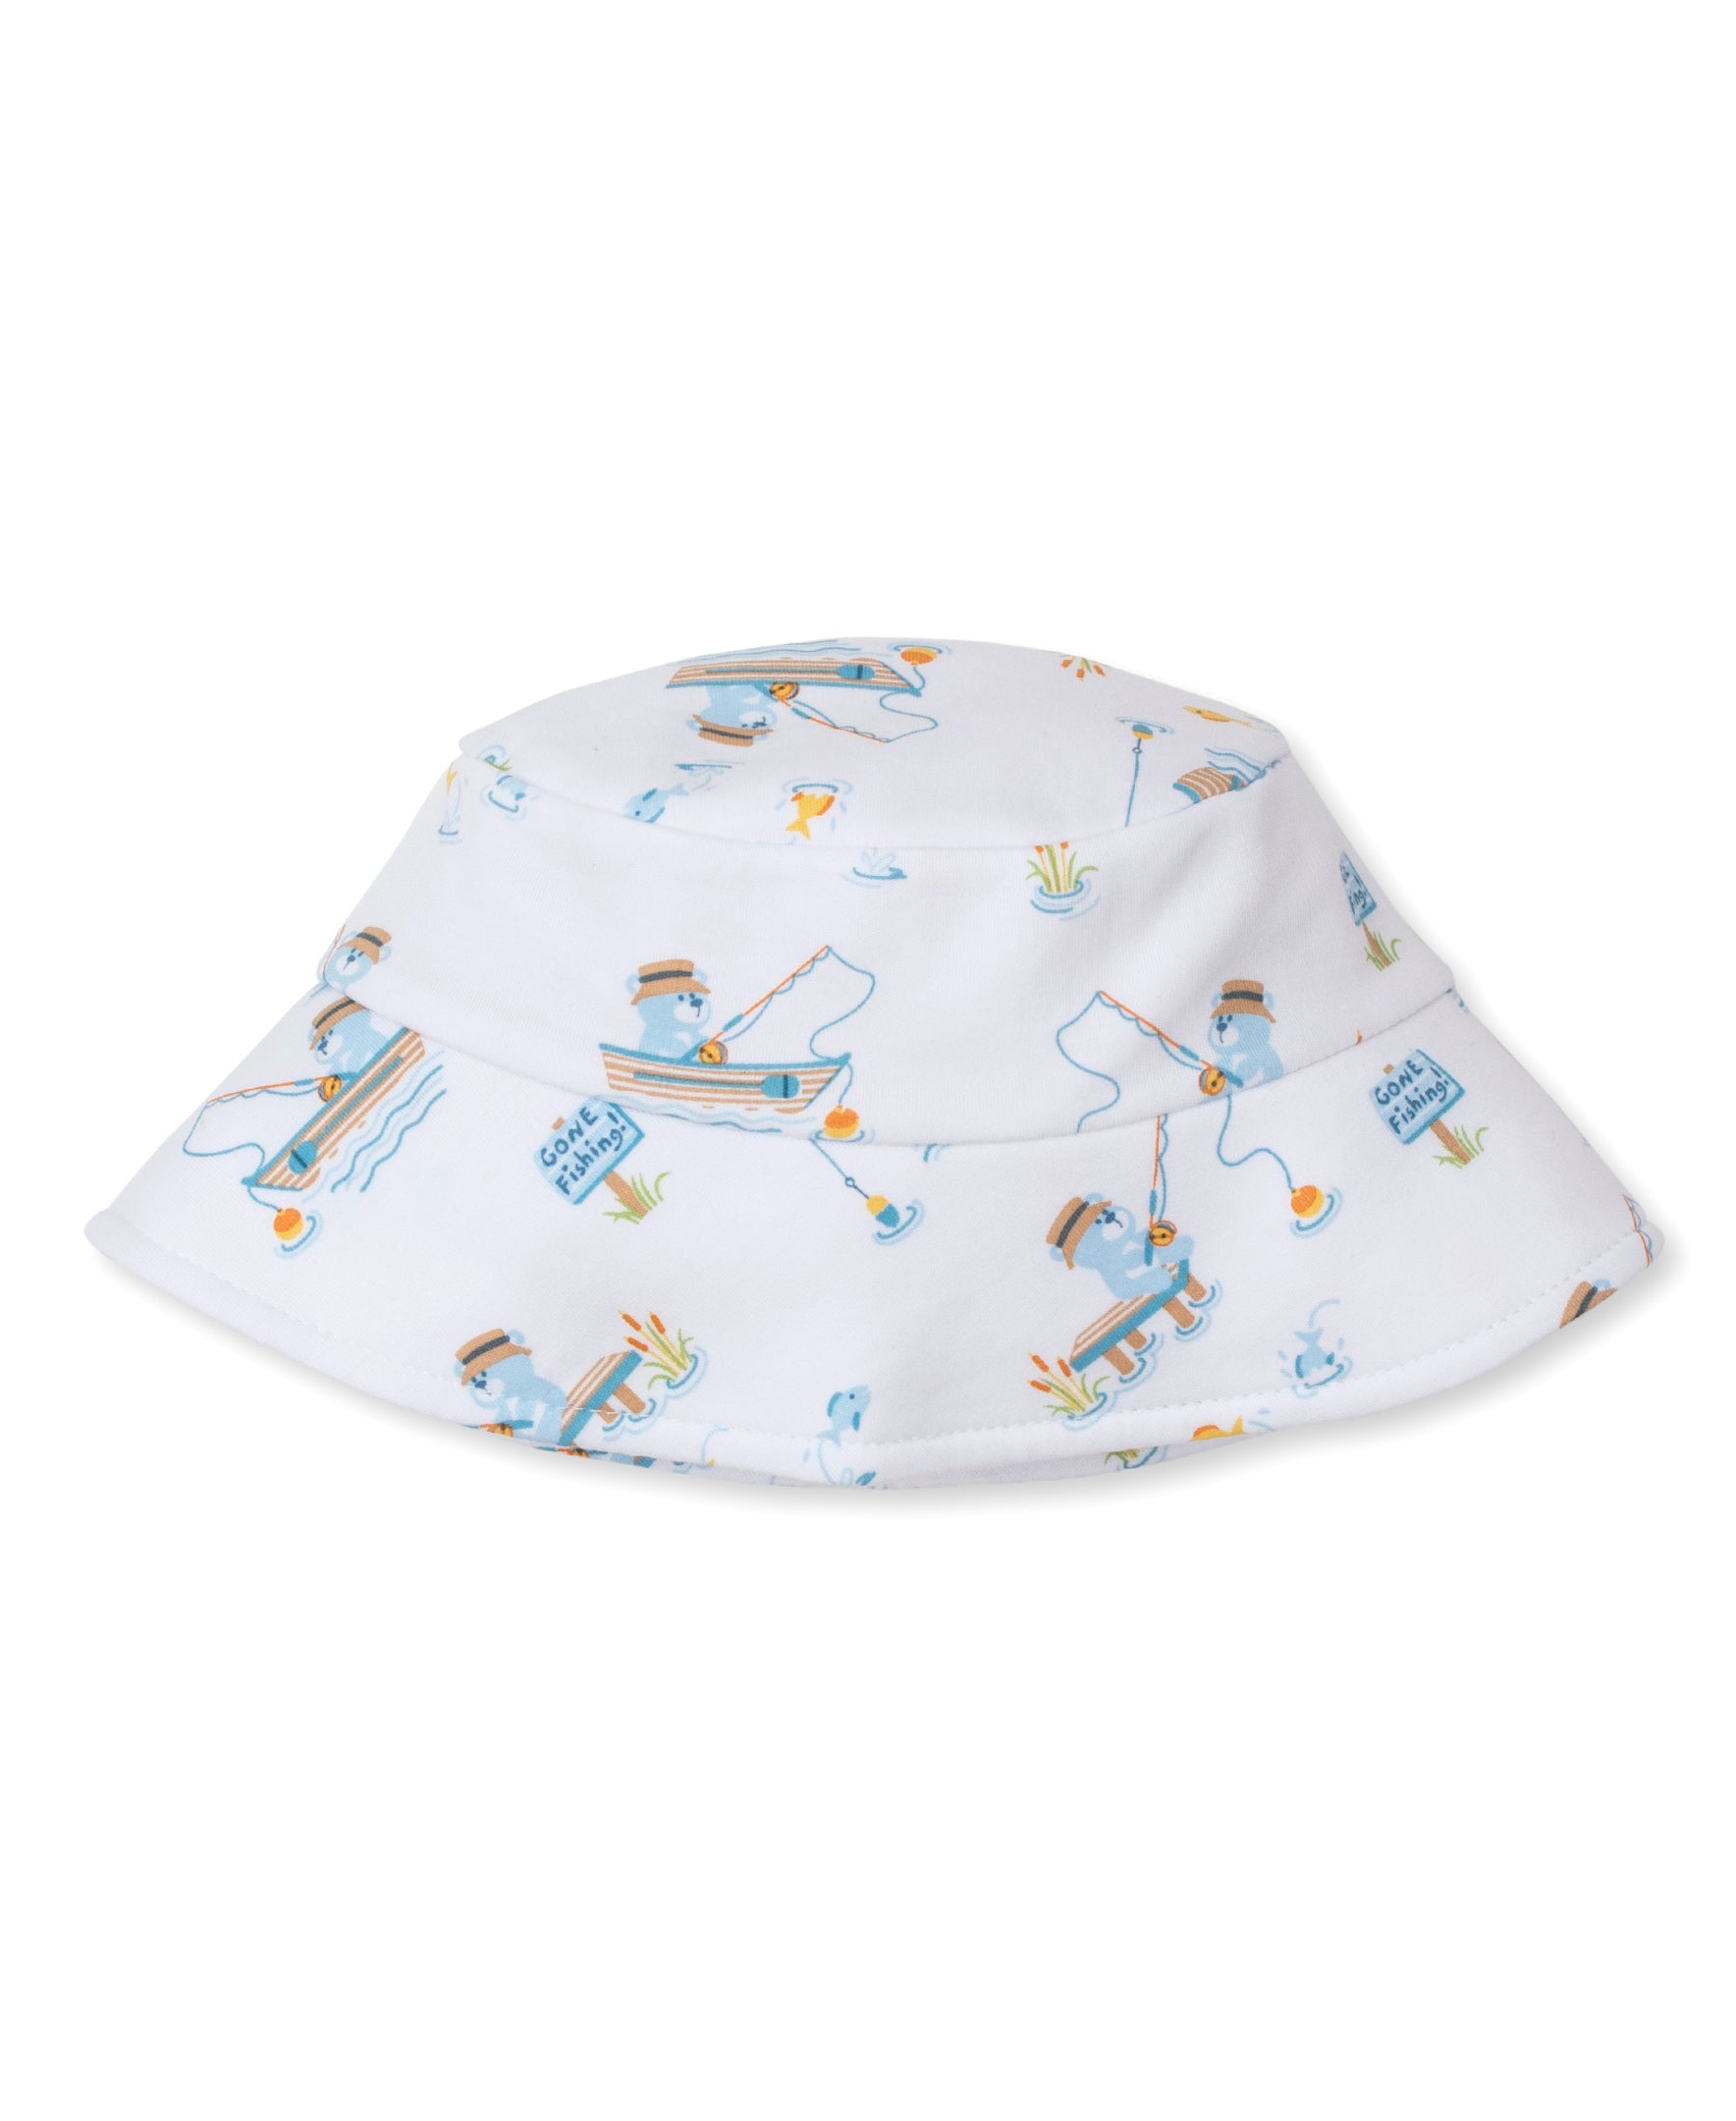 Kissy Kissy | Softer Than Soft | Rather Be Fishing Bucket Hat | Size: Small